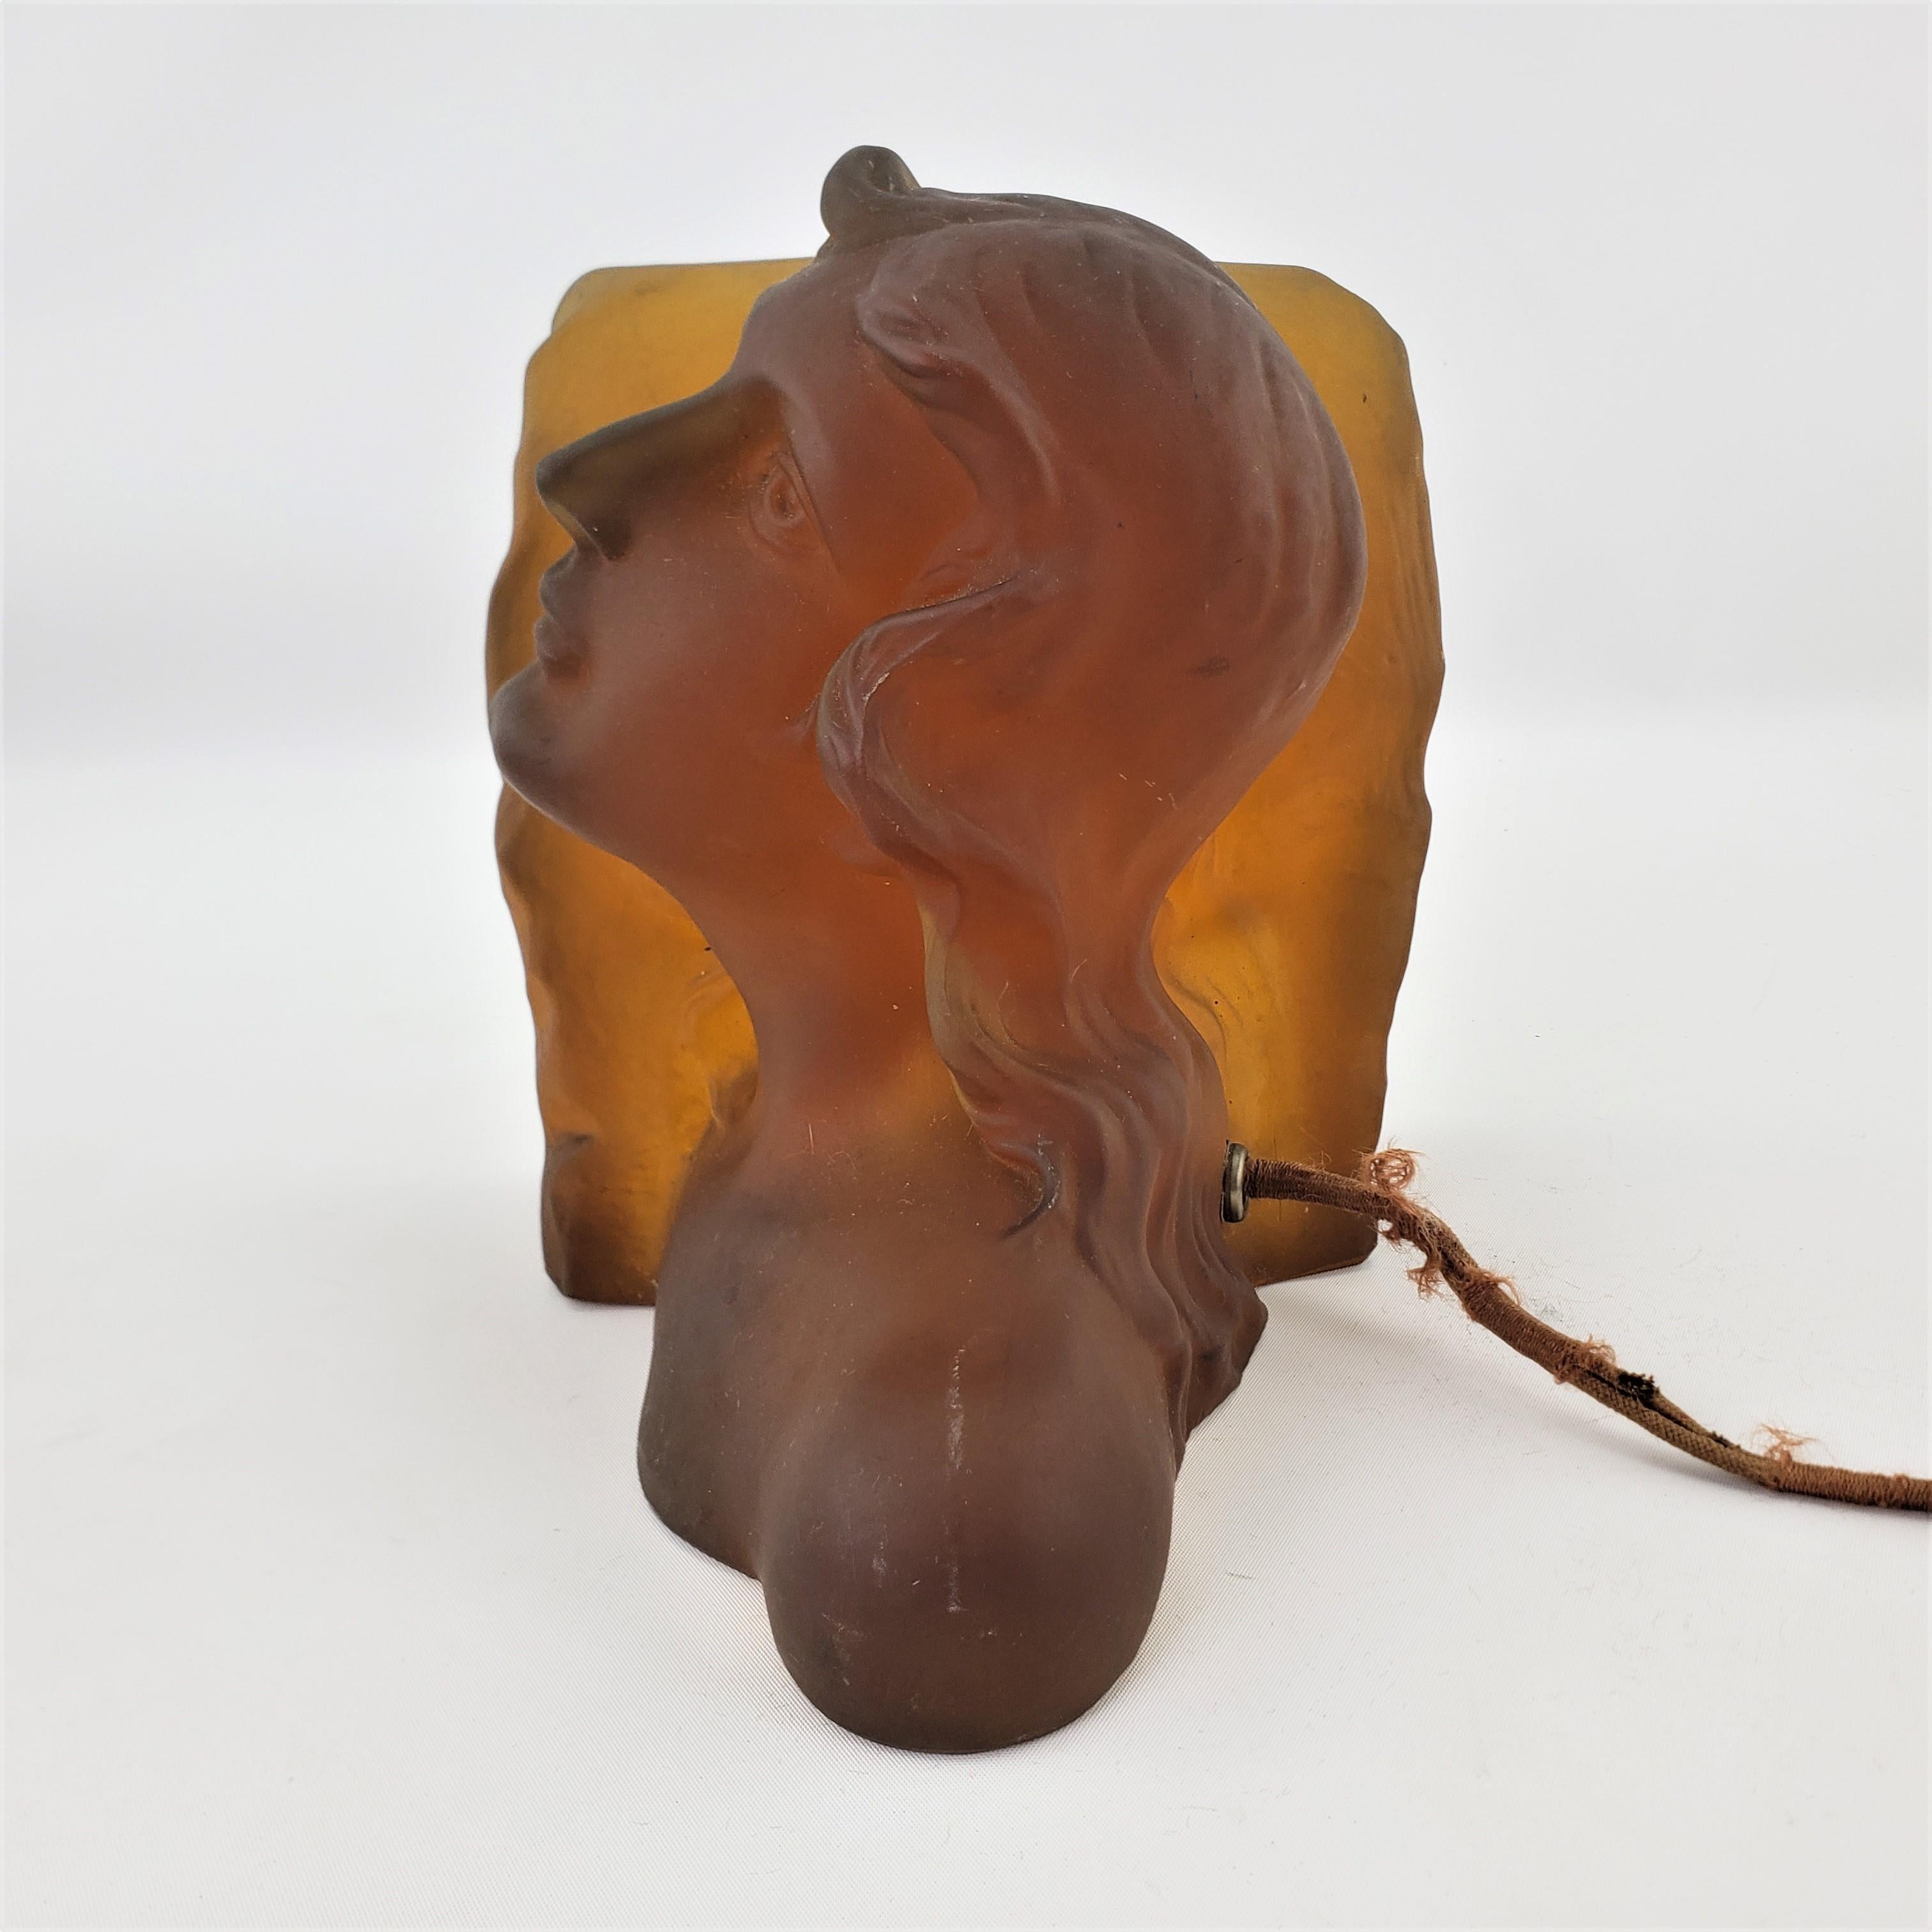 Art Glass Art Deco Heavy Amber Glass Figural Female Bust Table Accent Lamp or Sculpture For Sale